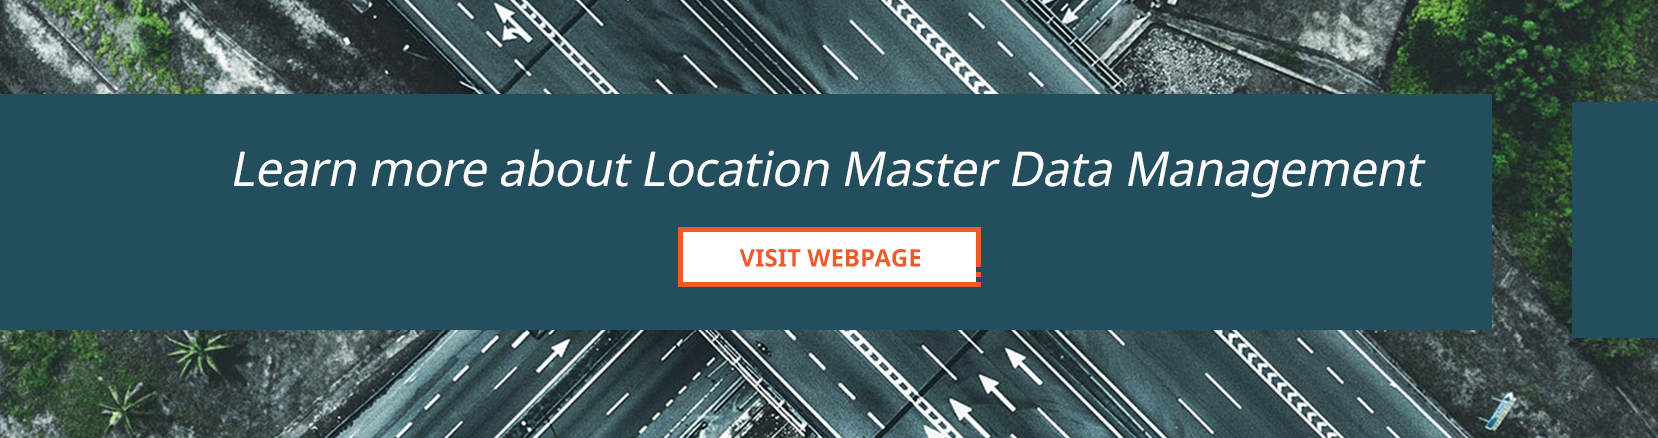 learn more about location master data management